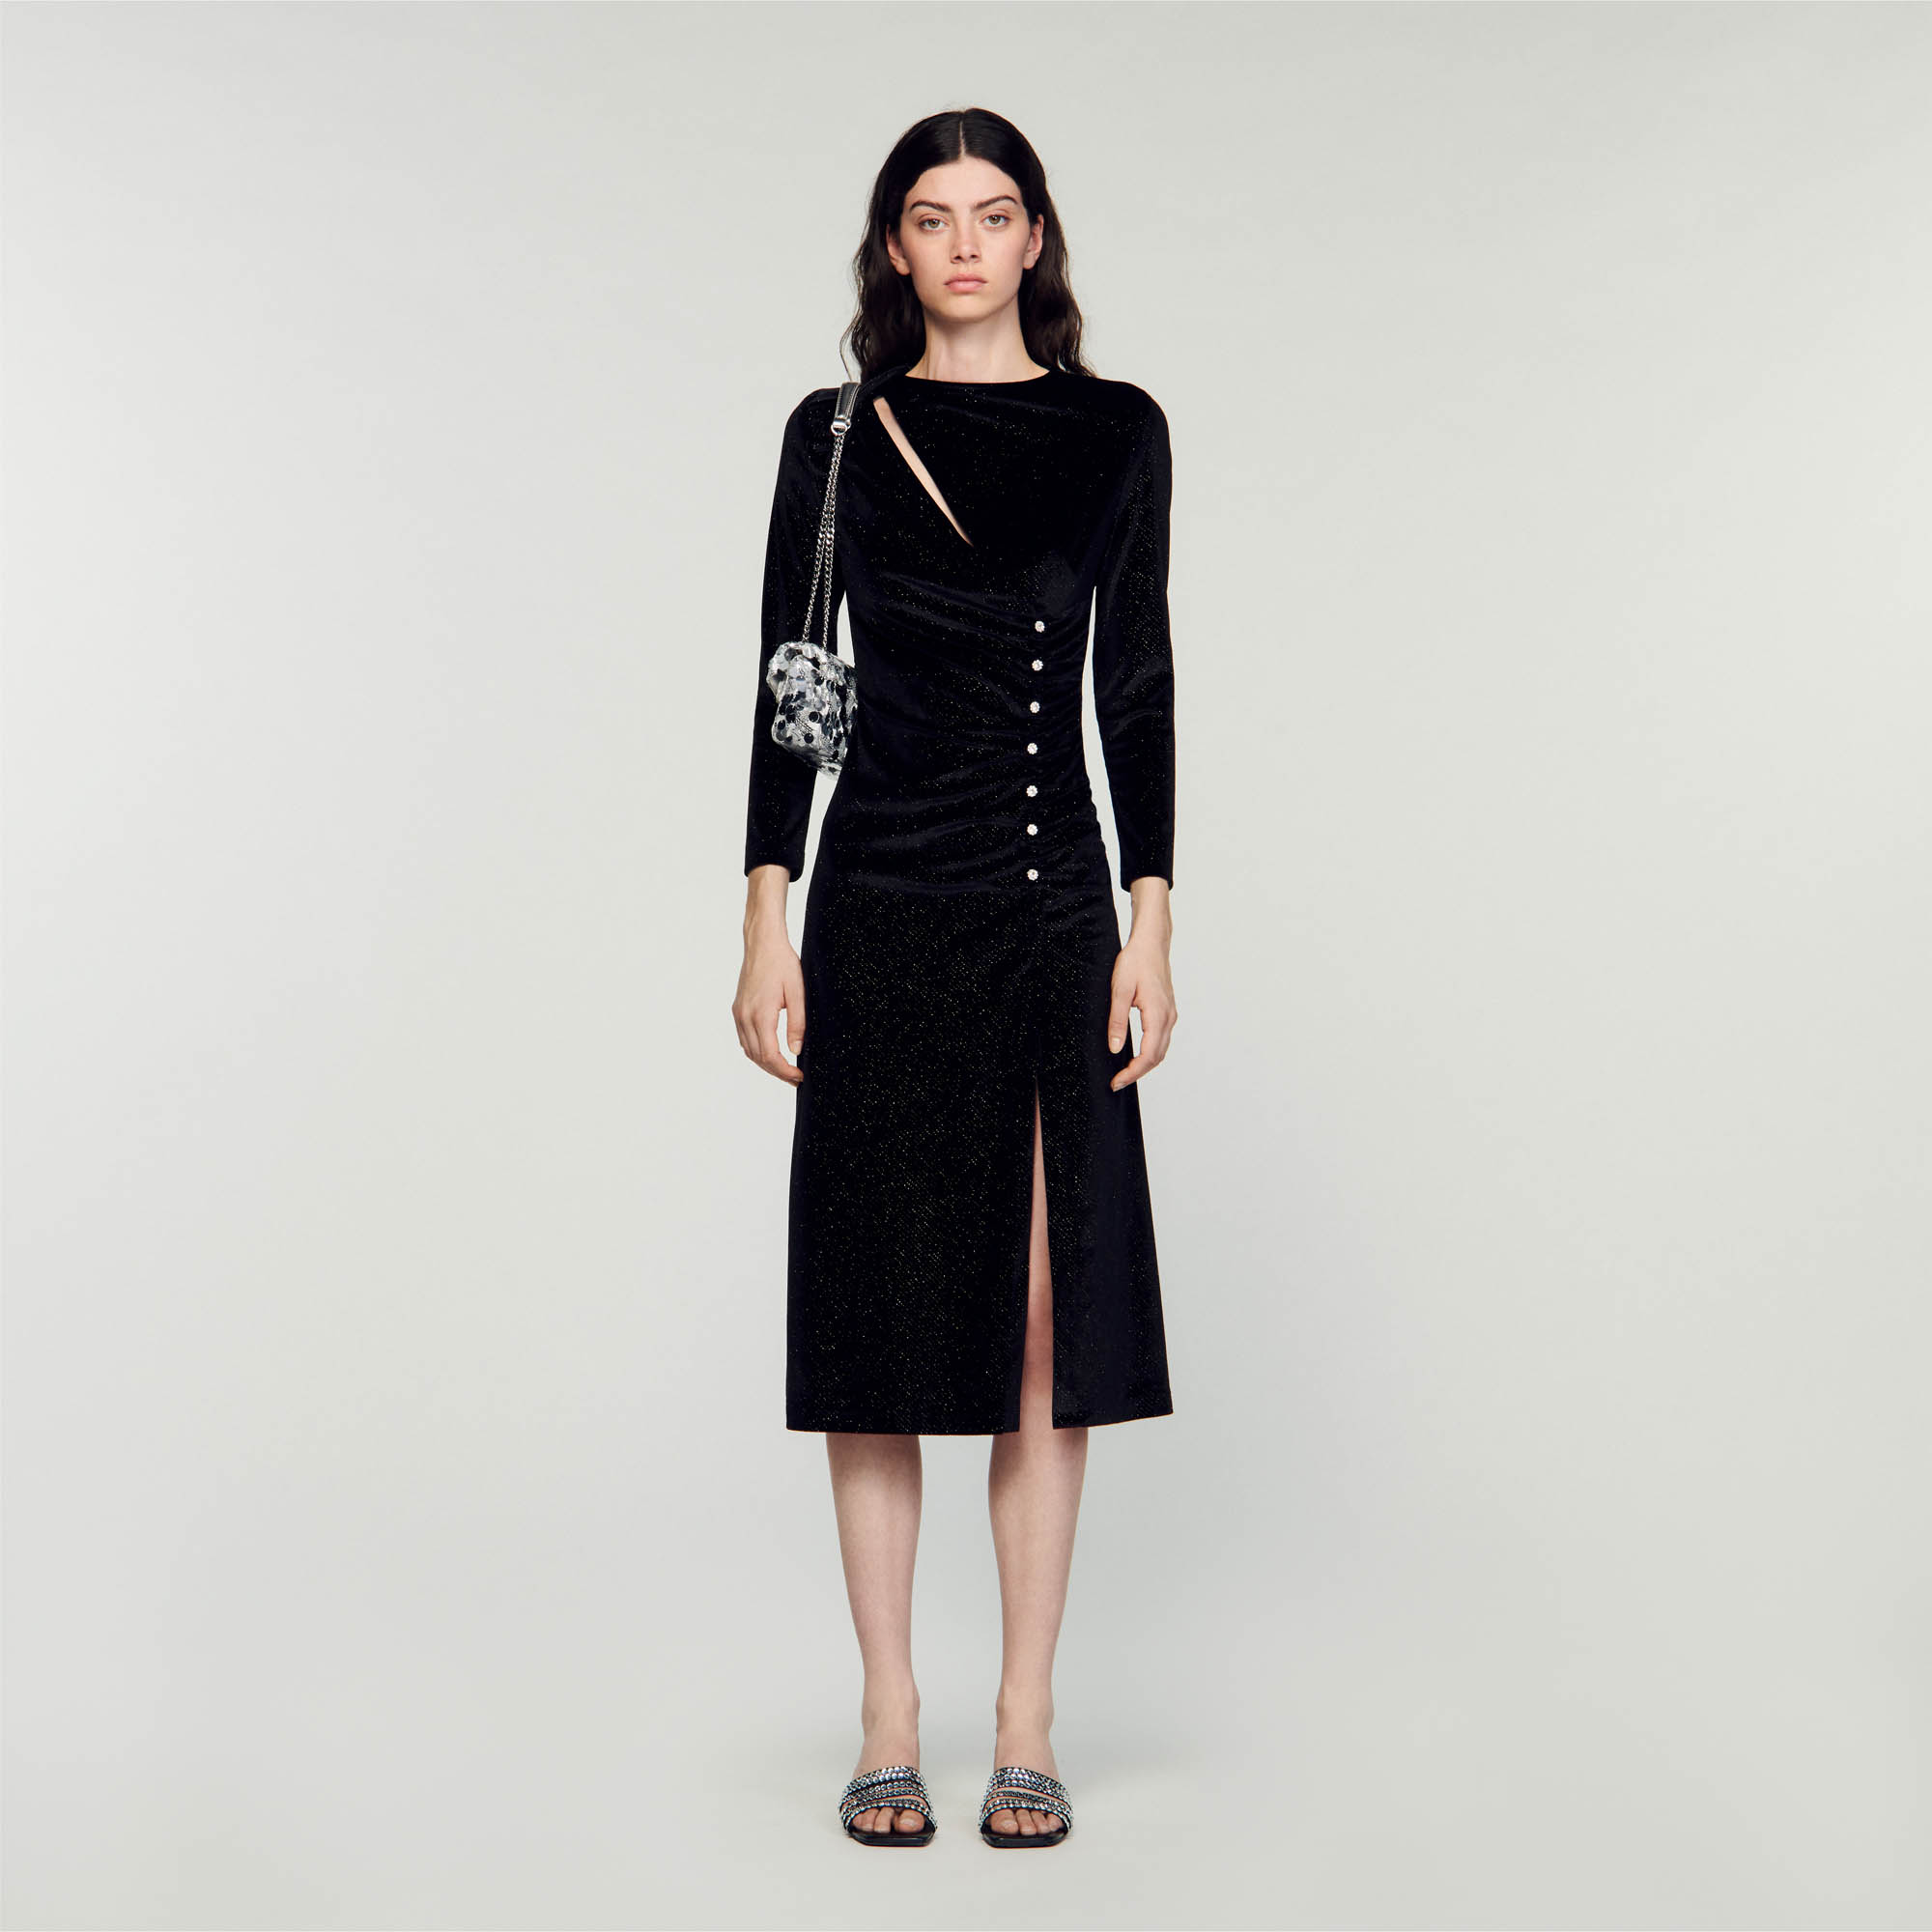 Sandro polyester Sequinned velvet midi dress with draped effect, featuring a round neck with a slit, long sleeves, a side slit and embellished with jewellery buttons on the side